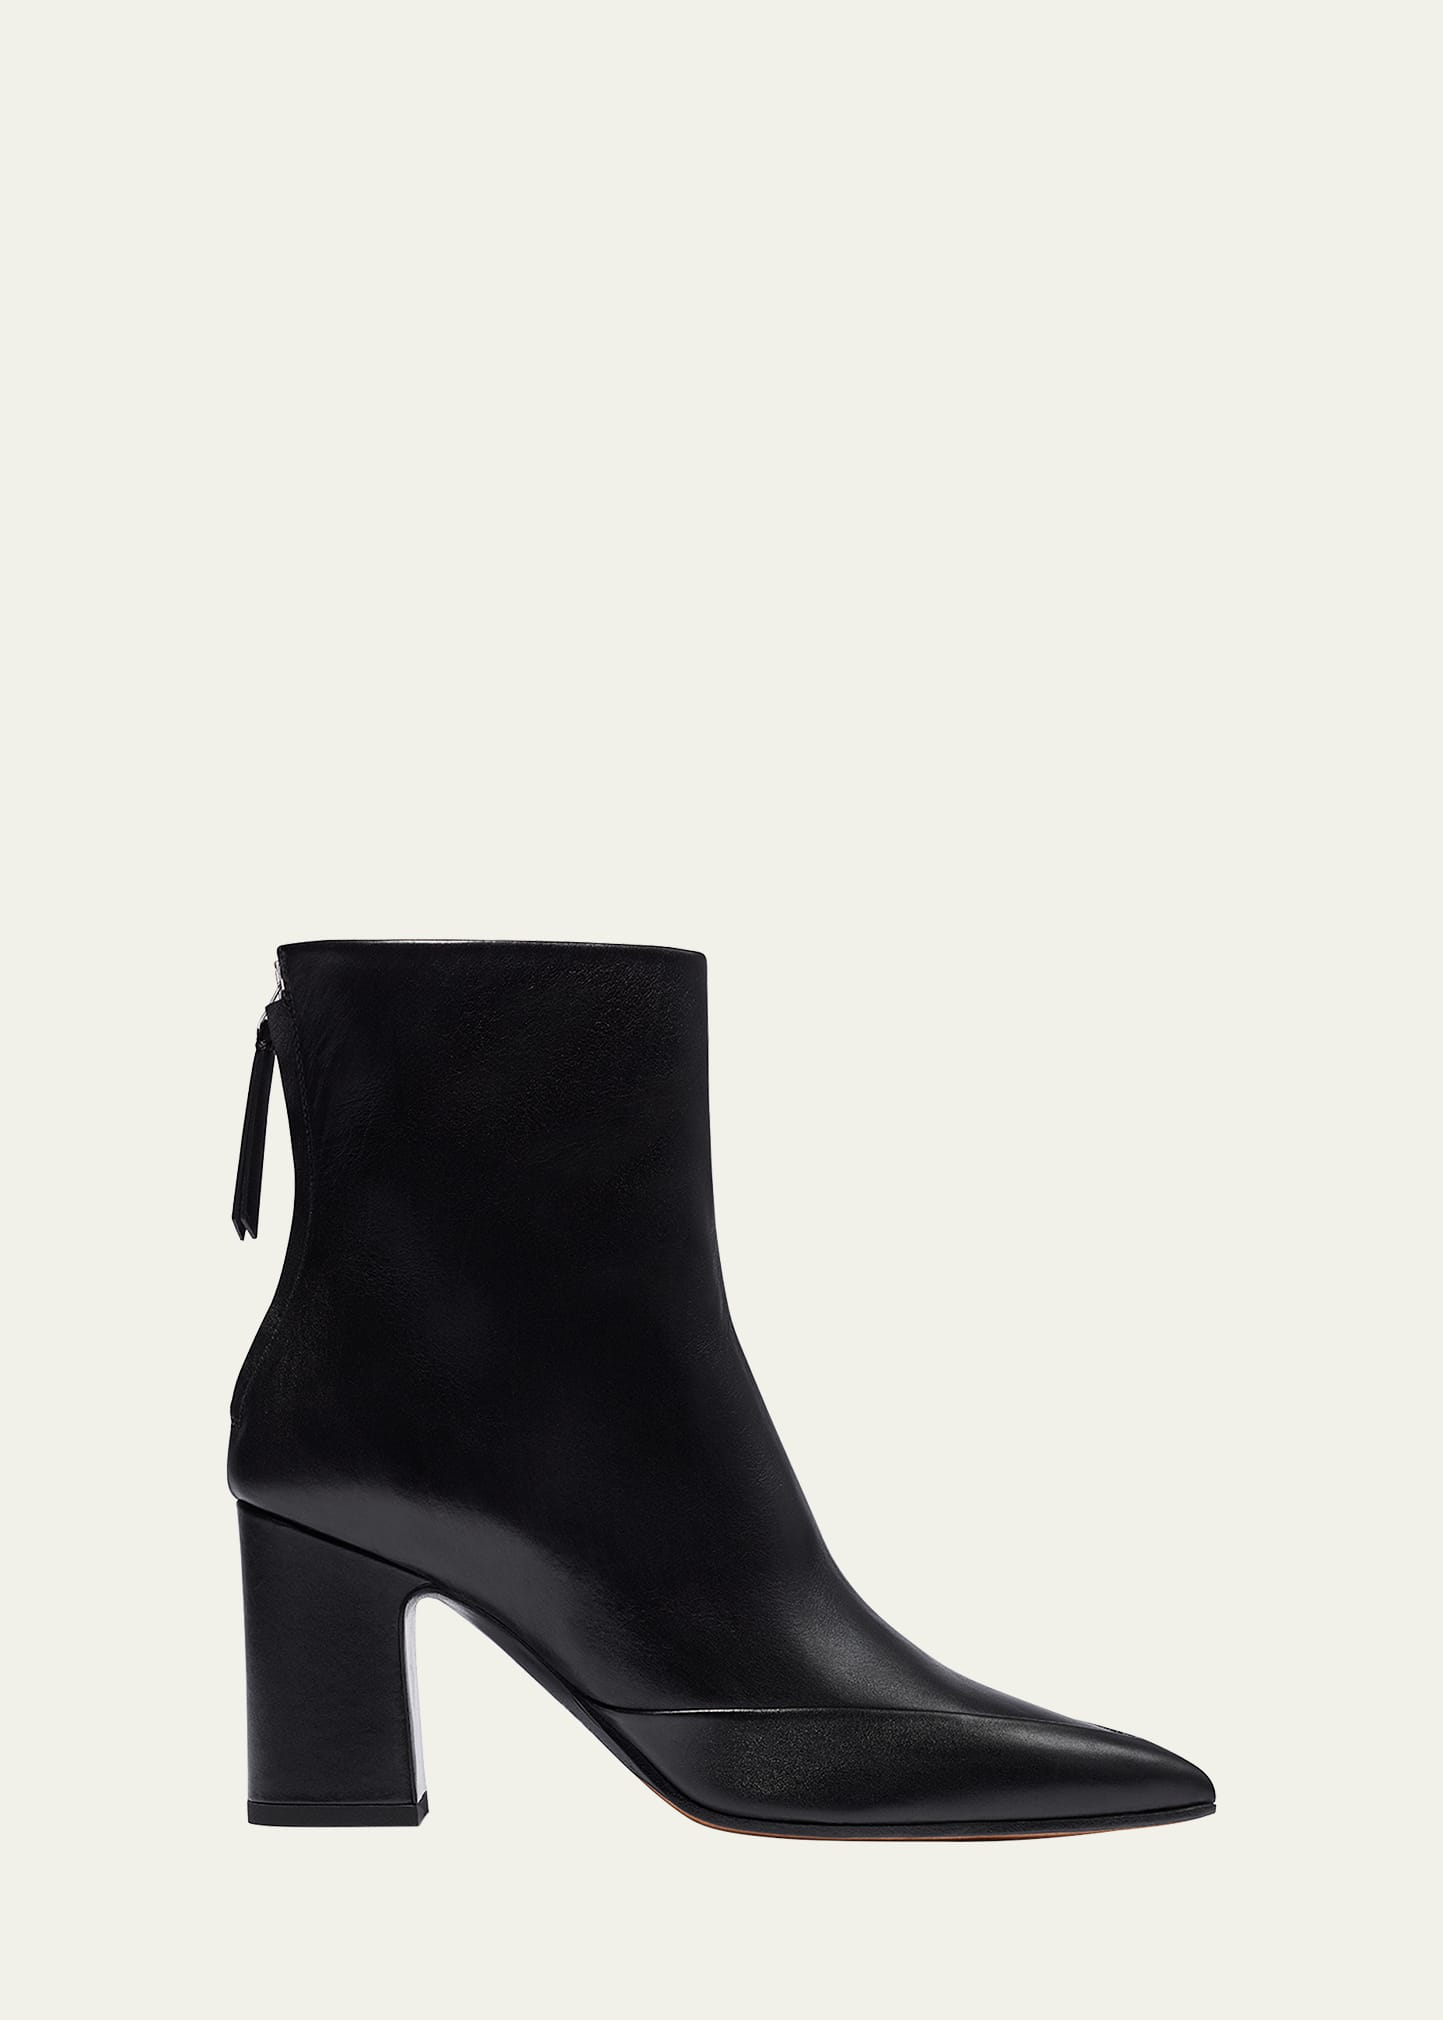 Emme Parsons Majic 80mm Leather Booties